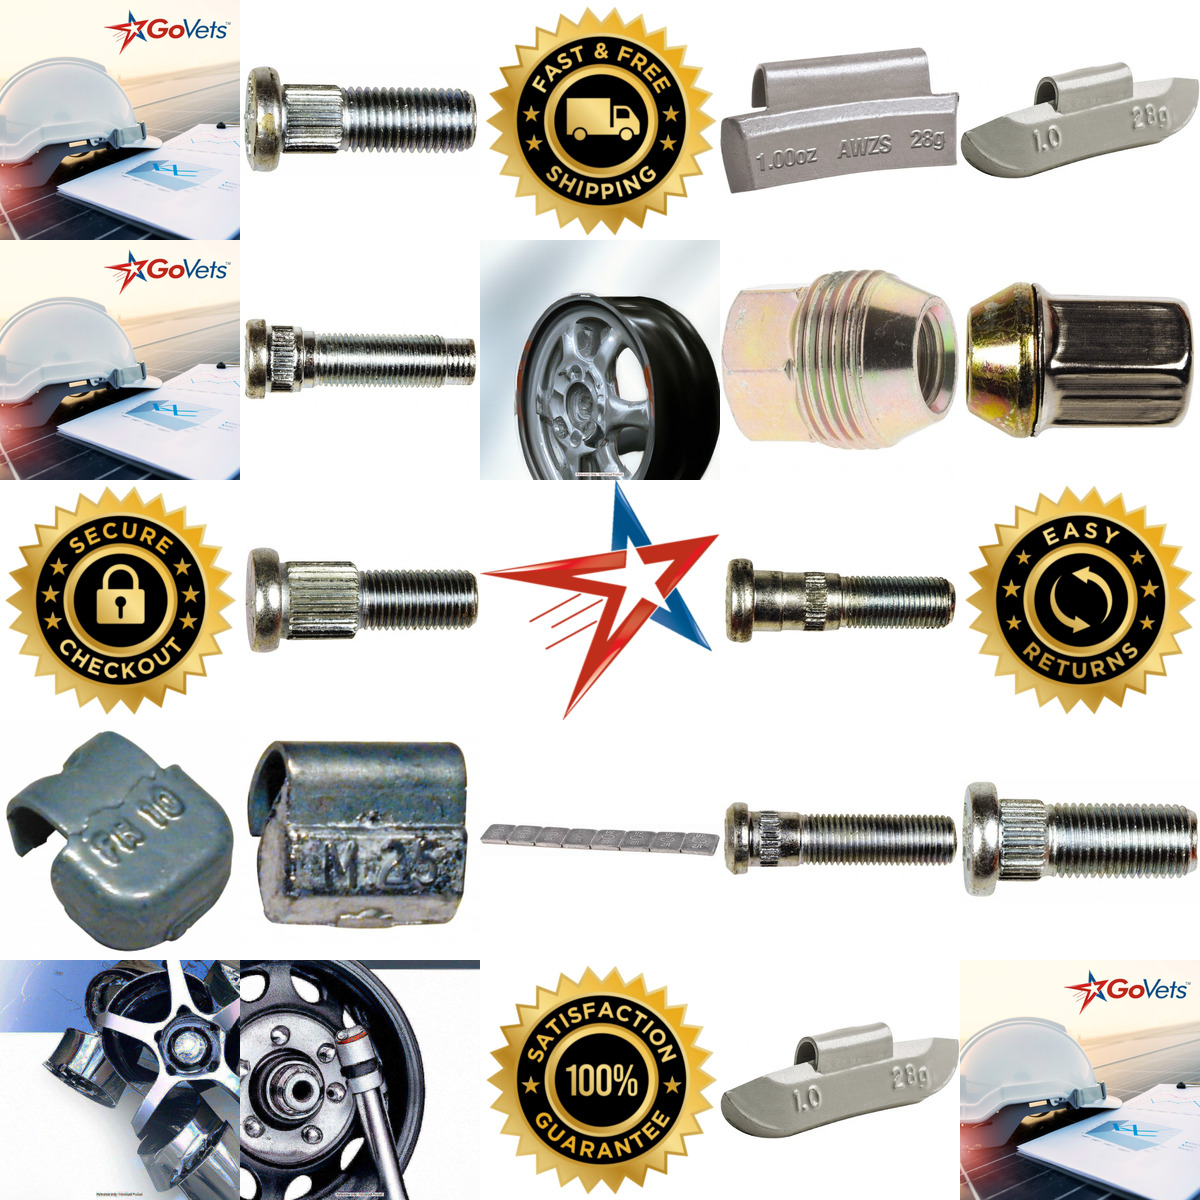 A selection of Automotive Wheel Hardware products on GoVets